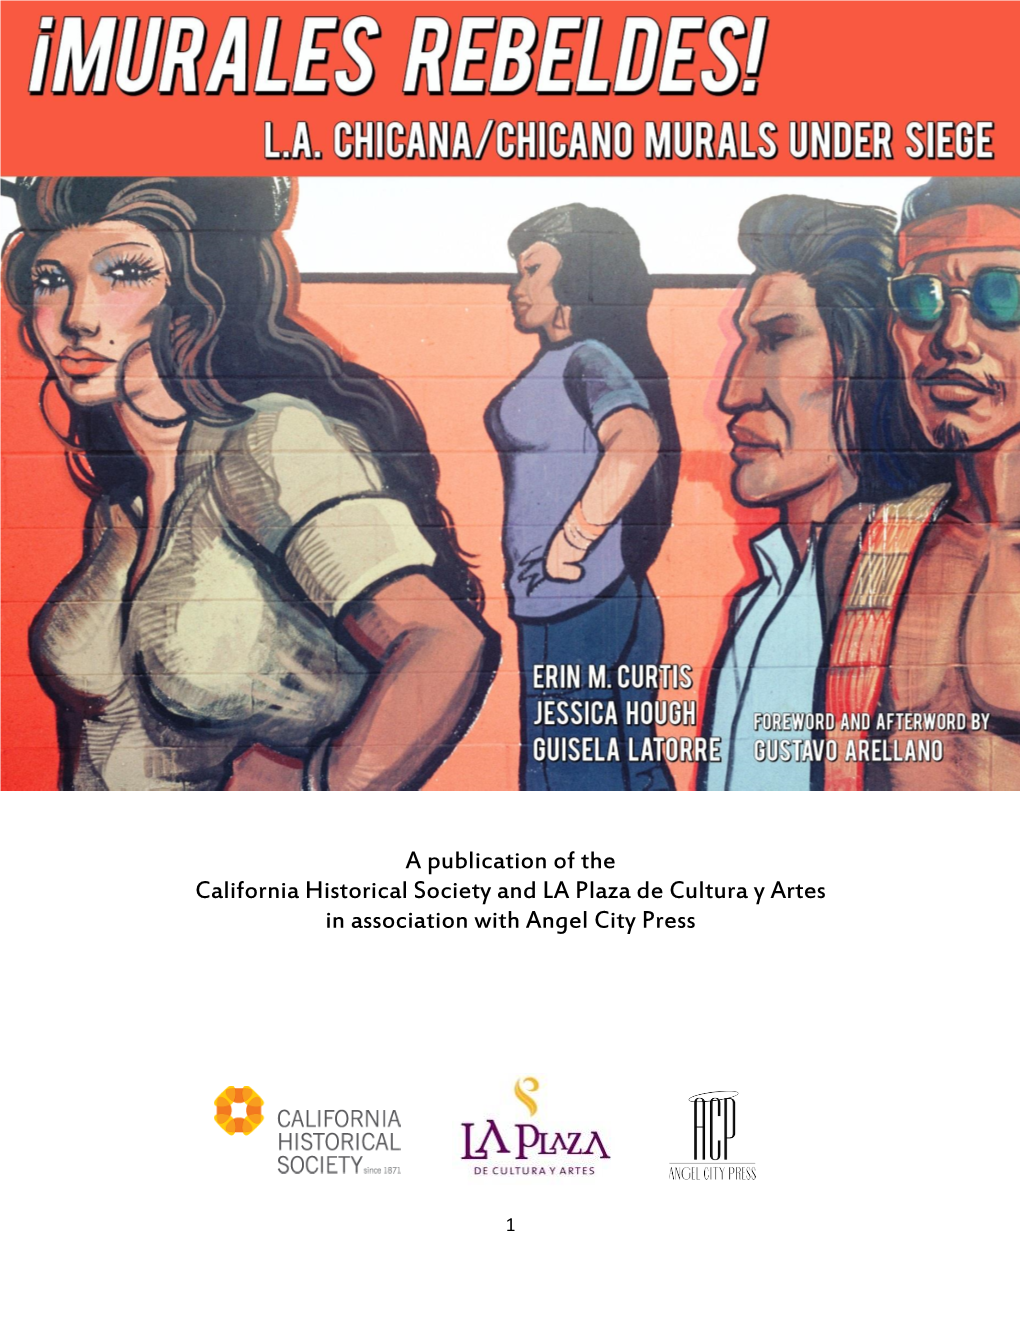 A Publication of the California Historical Society and LA Plaza De Cultura Y Artes in Association with Angel City Press